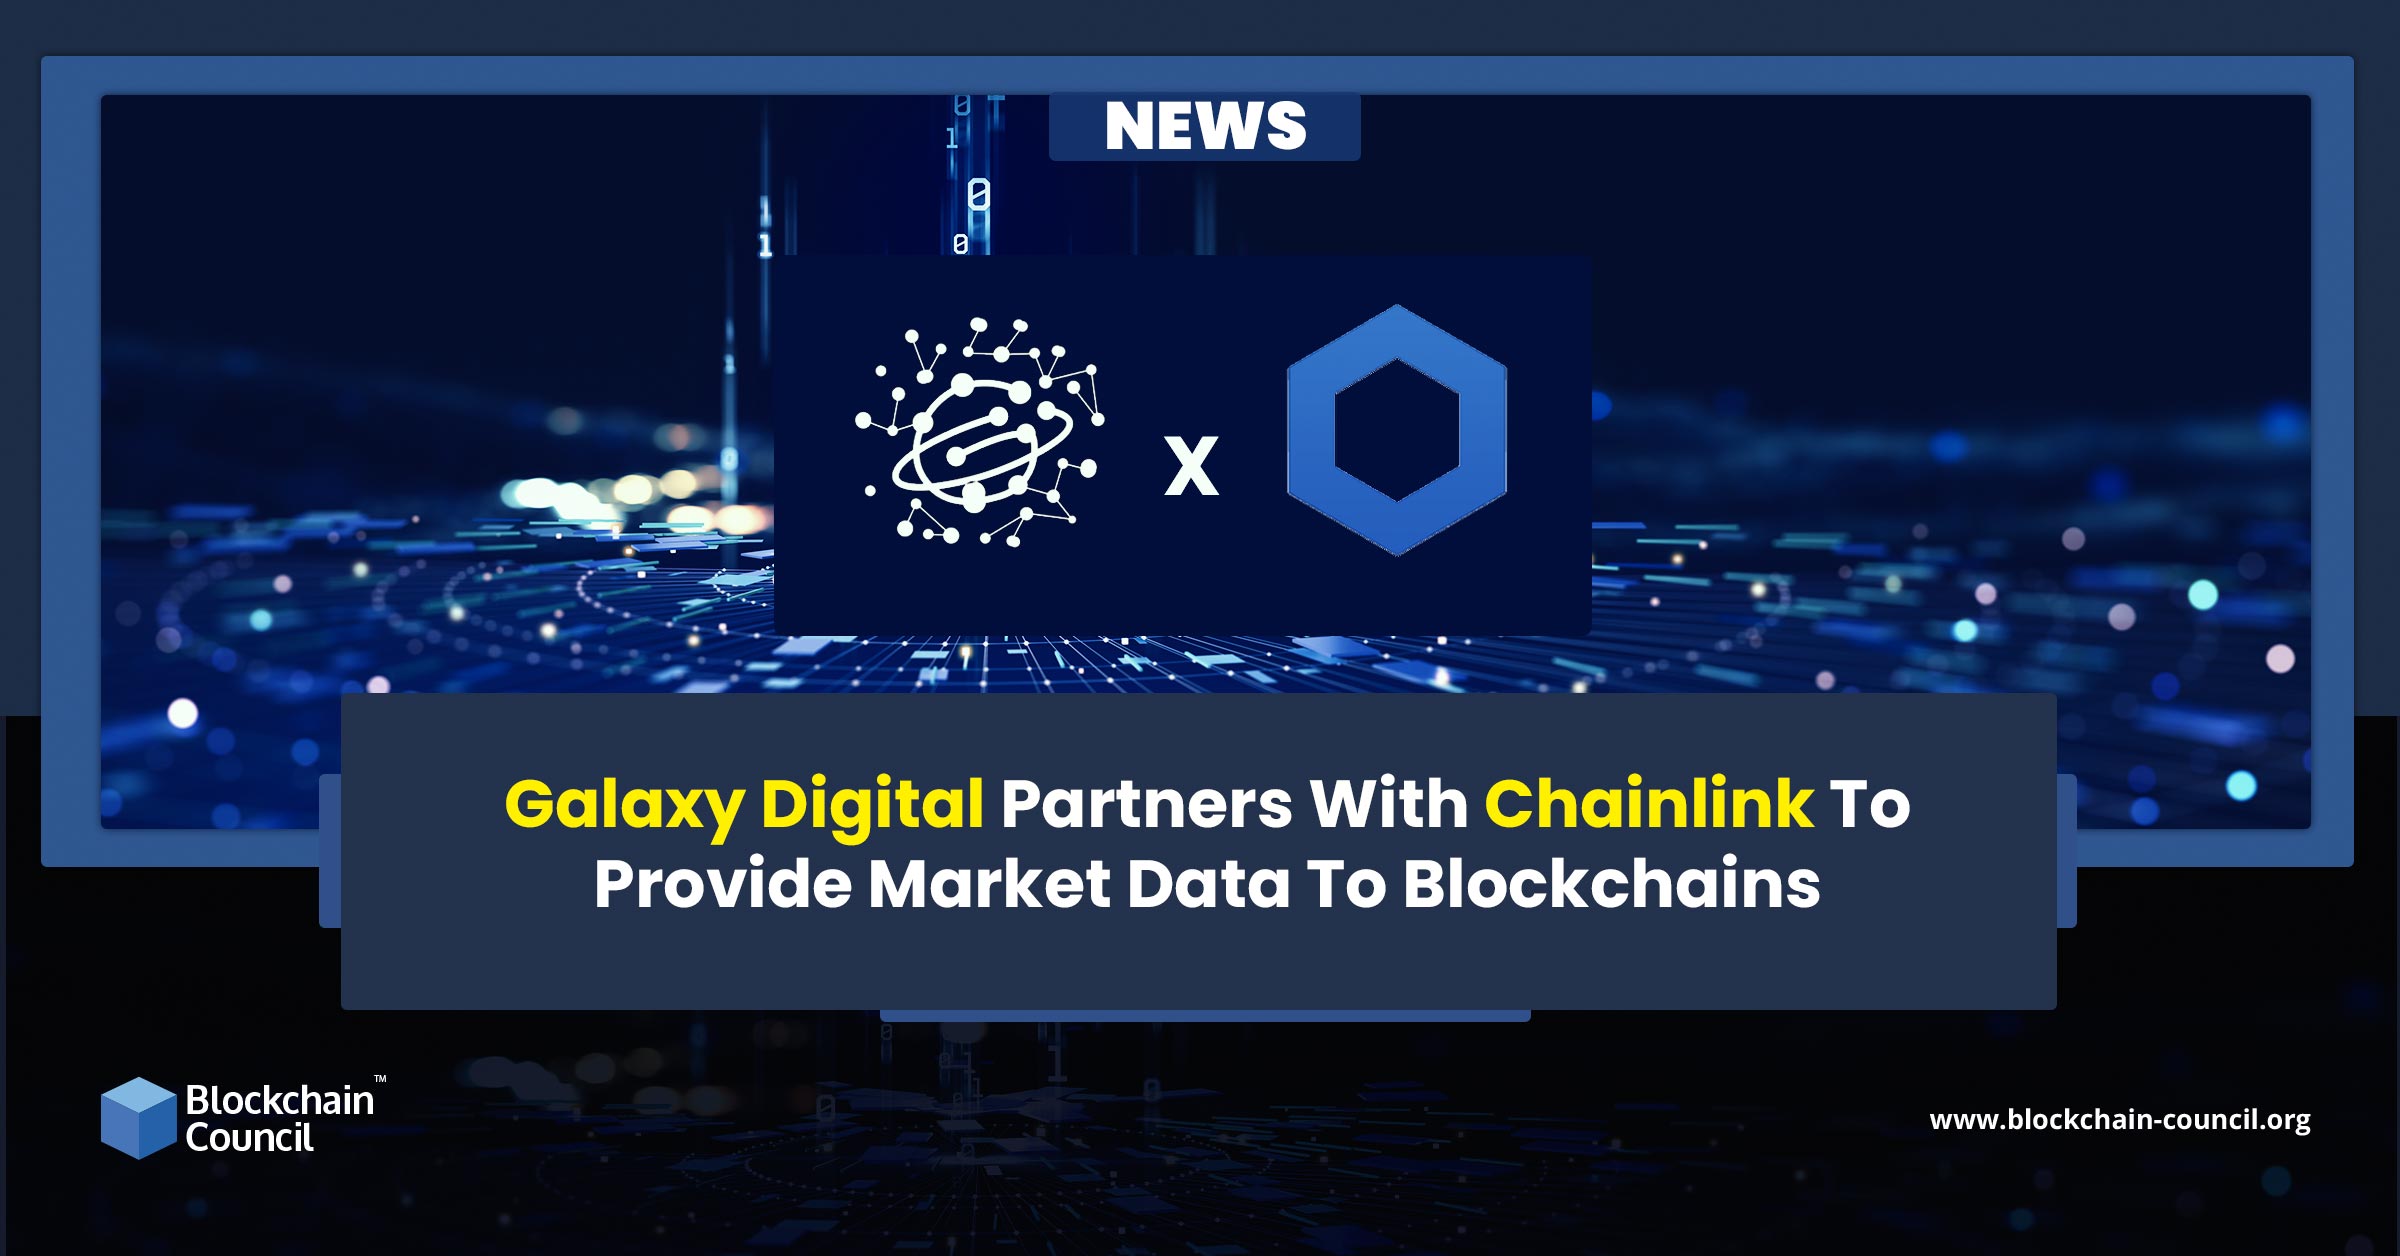 Galaxy Digital Partners With Chainlink To Provide Market Data To Blockchains